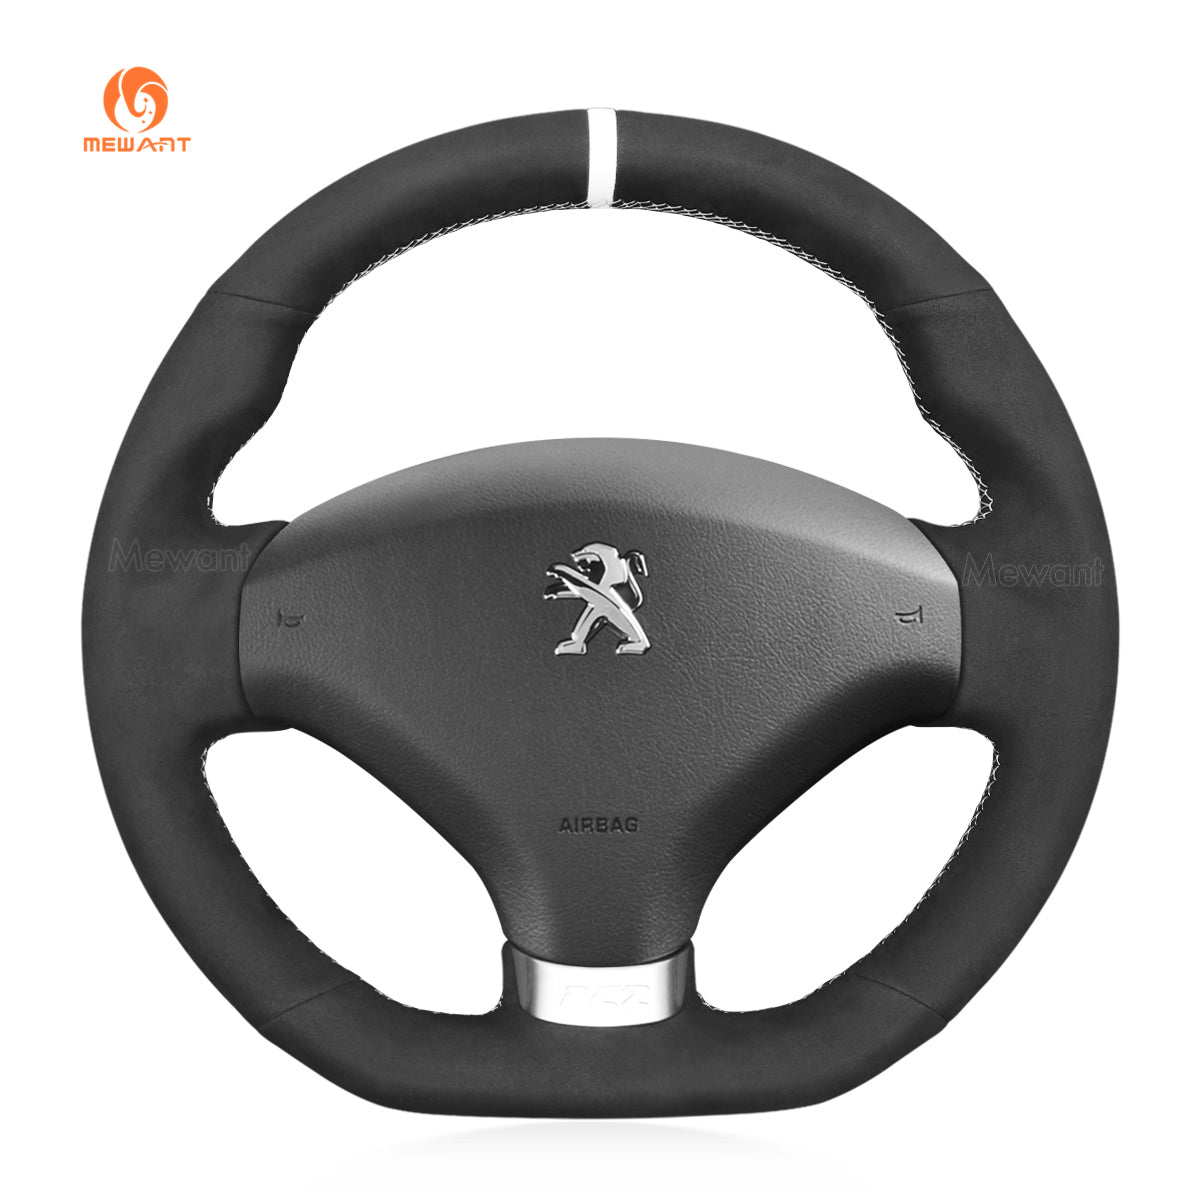 MEWANNT Hand Stitch Car Steering Wheel Cover for Peugeot RCZ 2010-2015